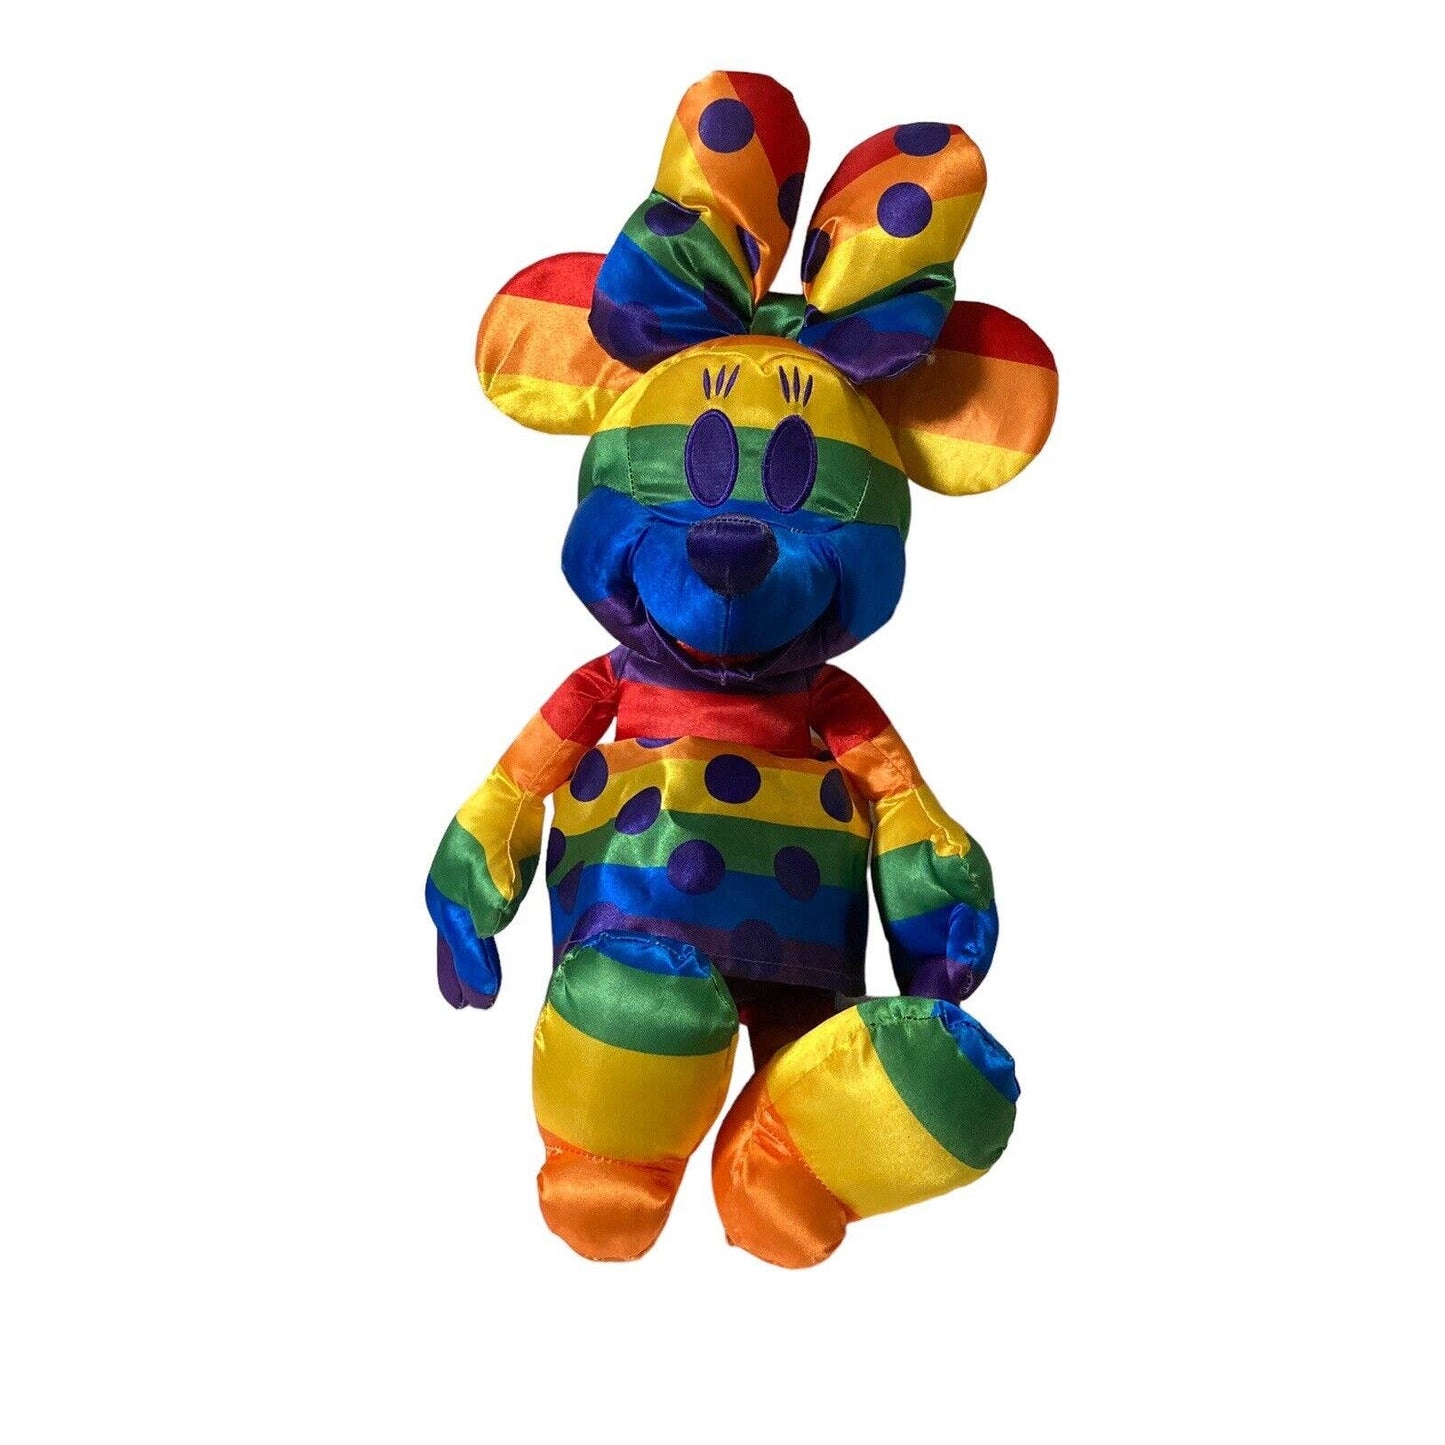 DISNEY Minnie Mouse Plush Doll Rainbow Pride Collection Limited Edition 18"